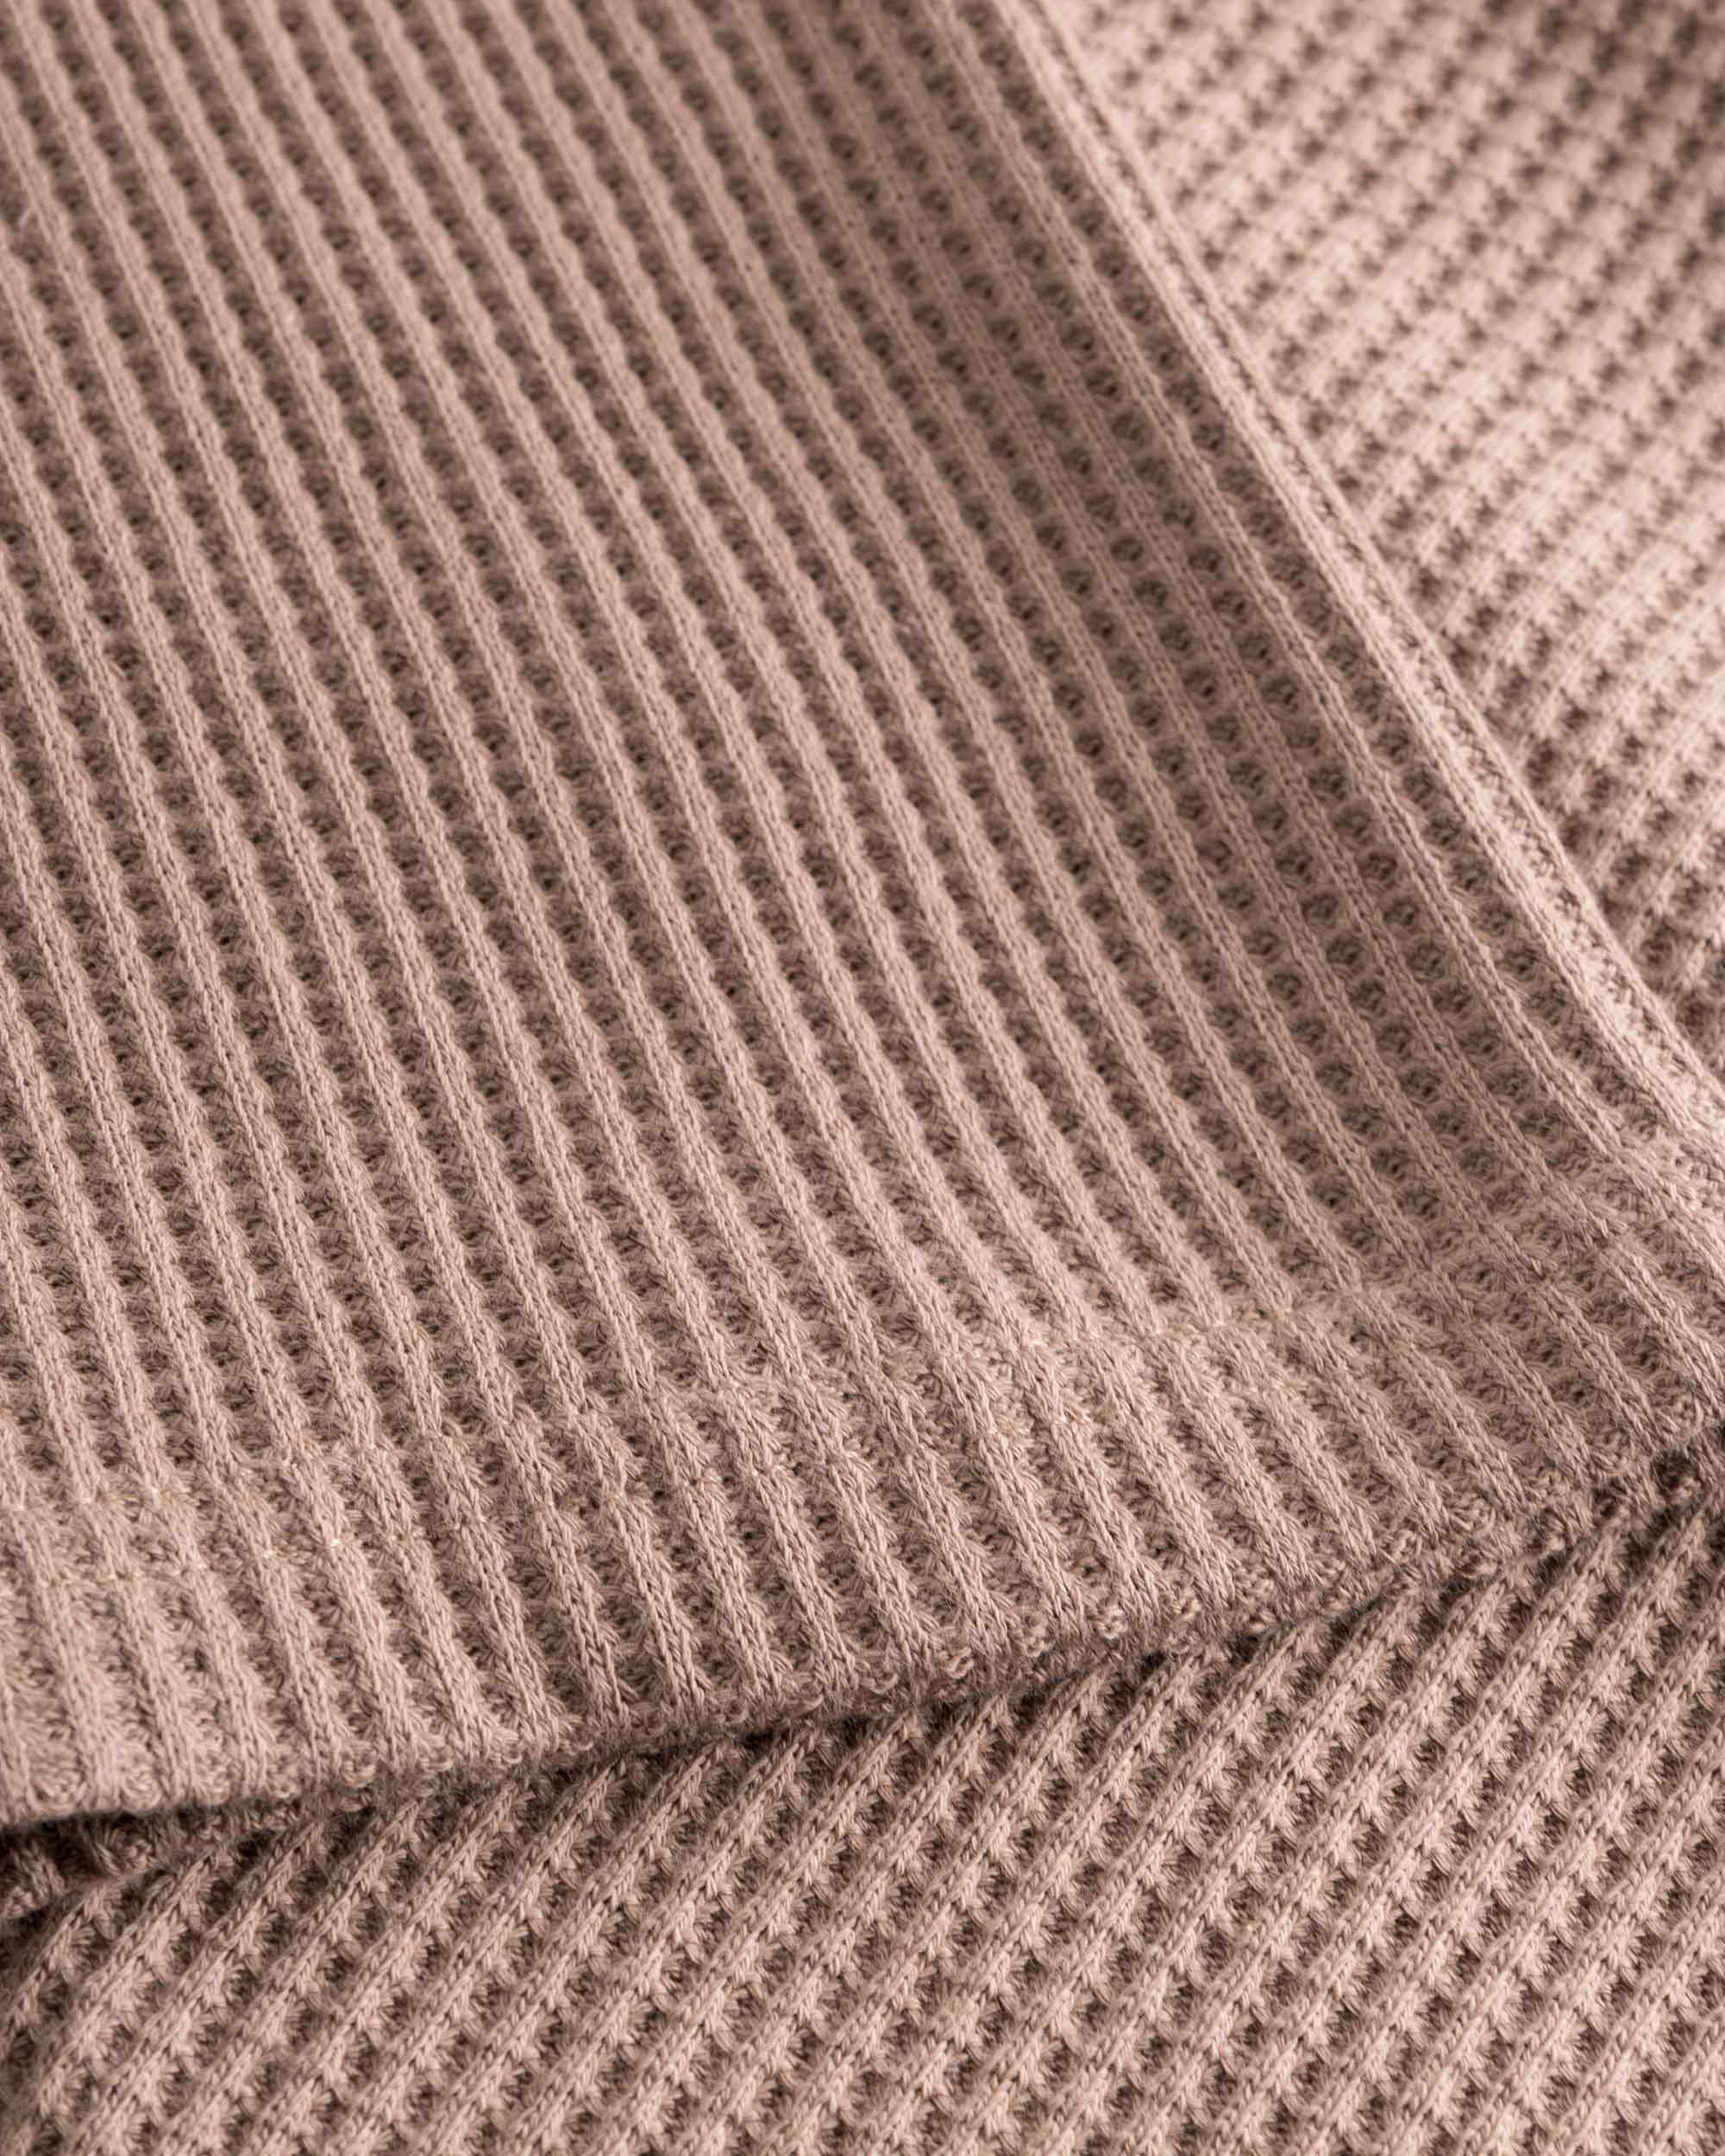 Close up on stitchings and sleeve on a brown waffle-patterned sweatshirt